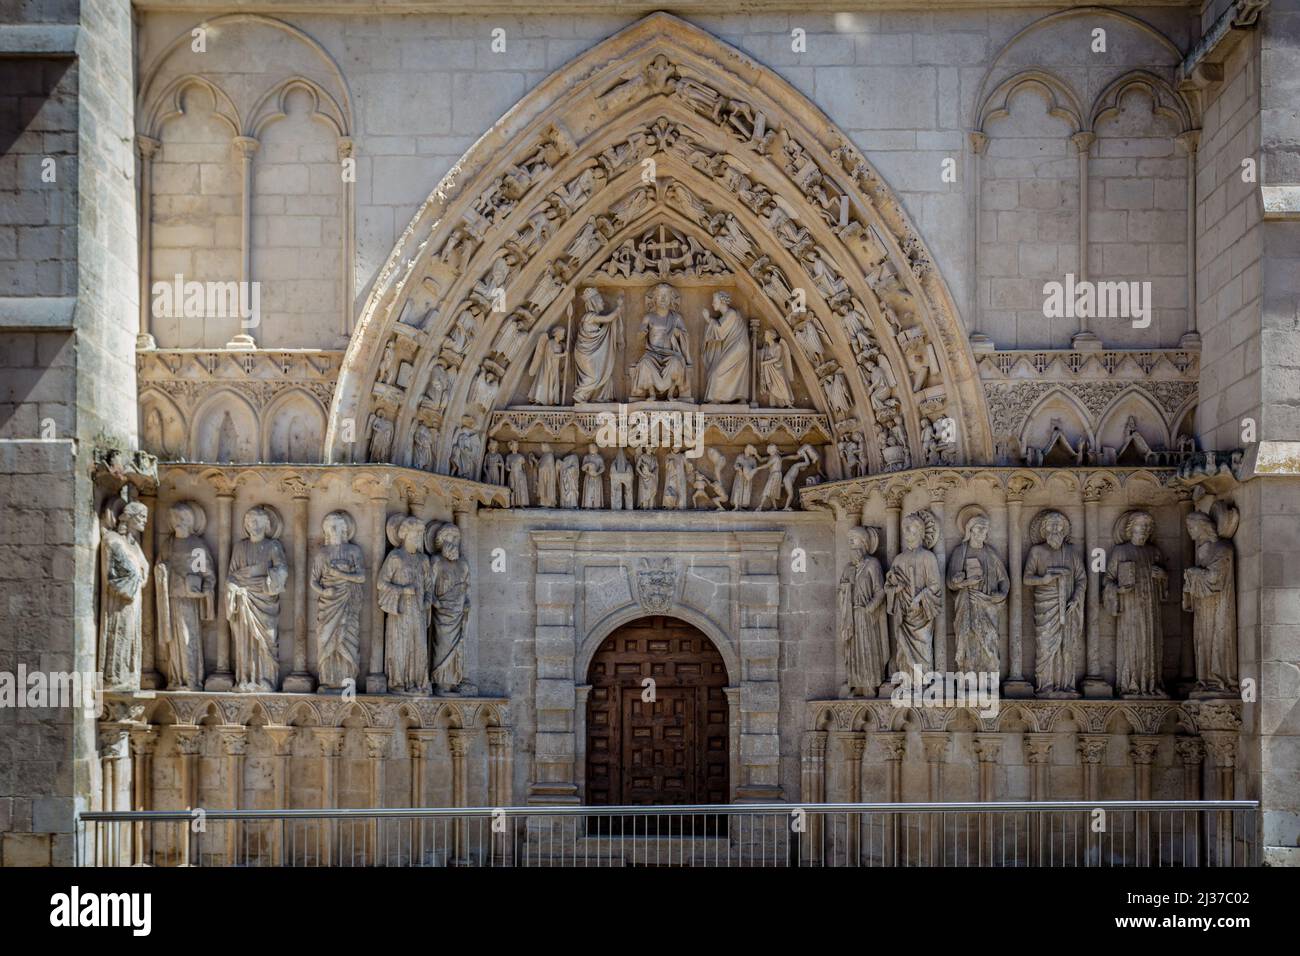 Sculptures portraying the apostles in the doorway of the gothic cathedral of Burgos, Spain. Stock Photo